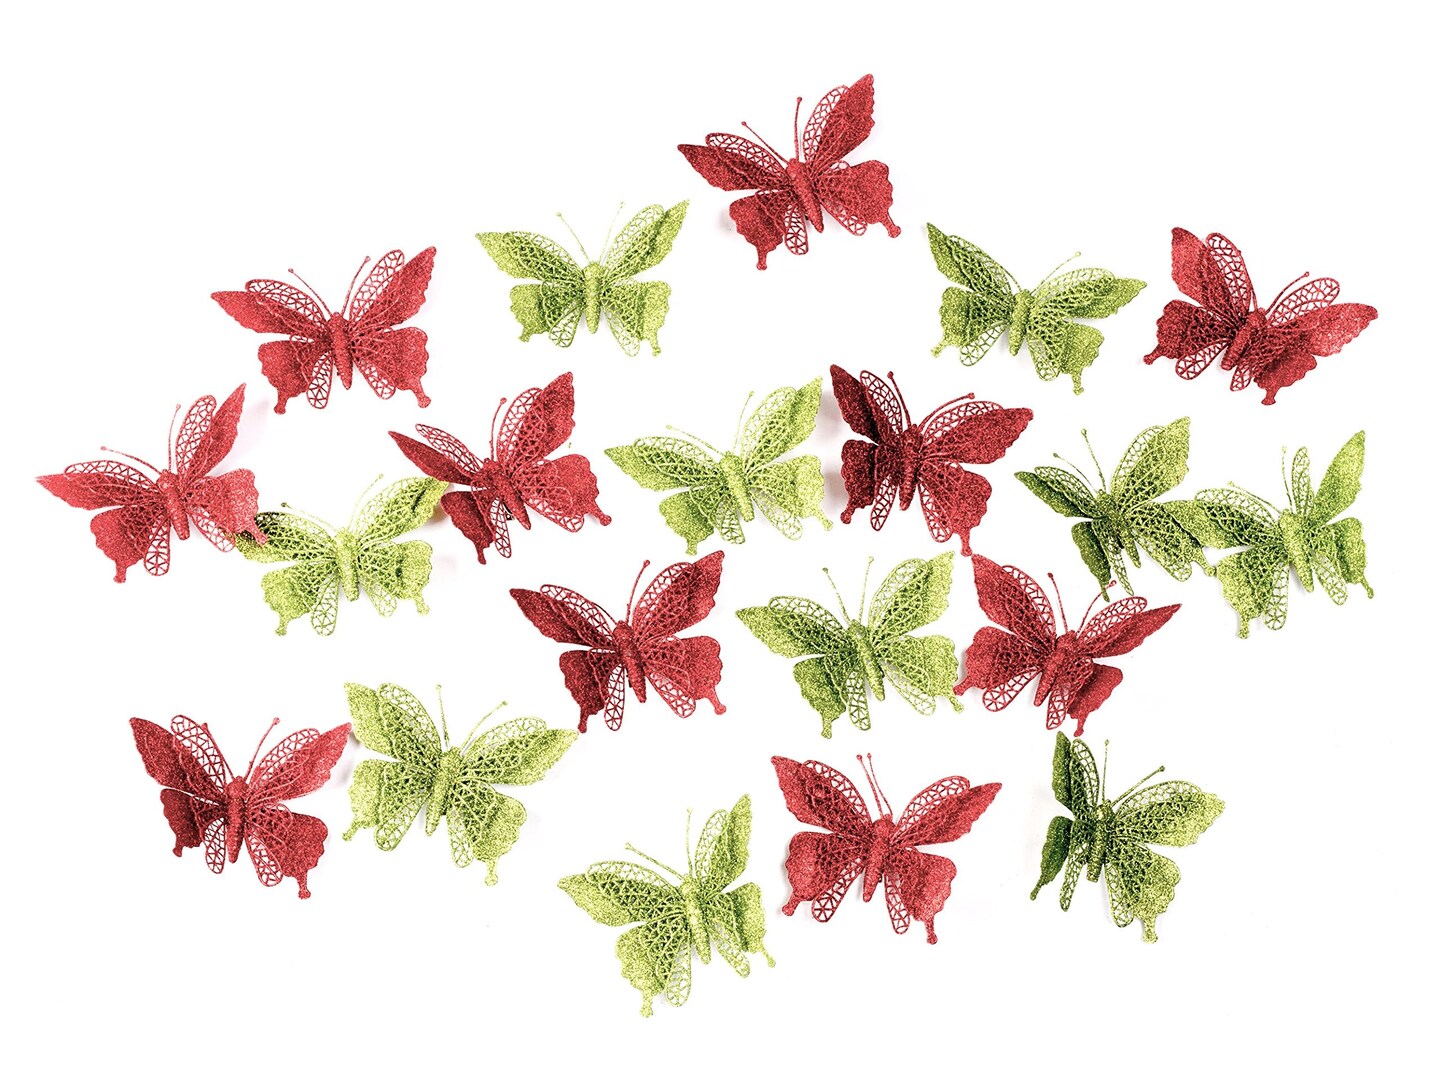 Butterfly Ornament Clips, Shatterproof Christmas Tree Ornaments Green And Red, Butterfly Decoration For Home, Party, Wedding, Or Holiday Dcor (Red, Green)